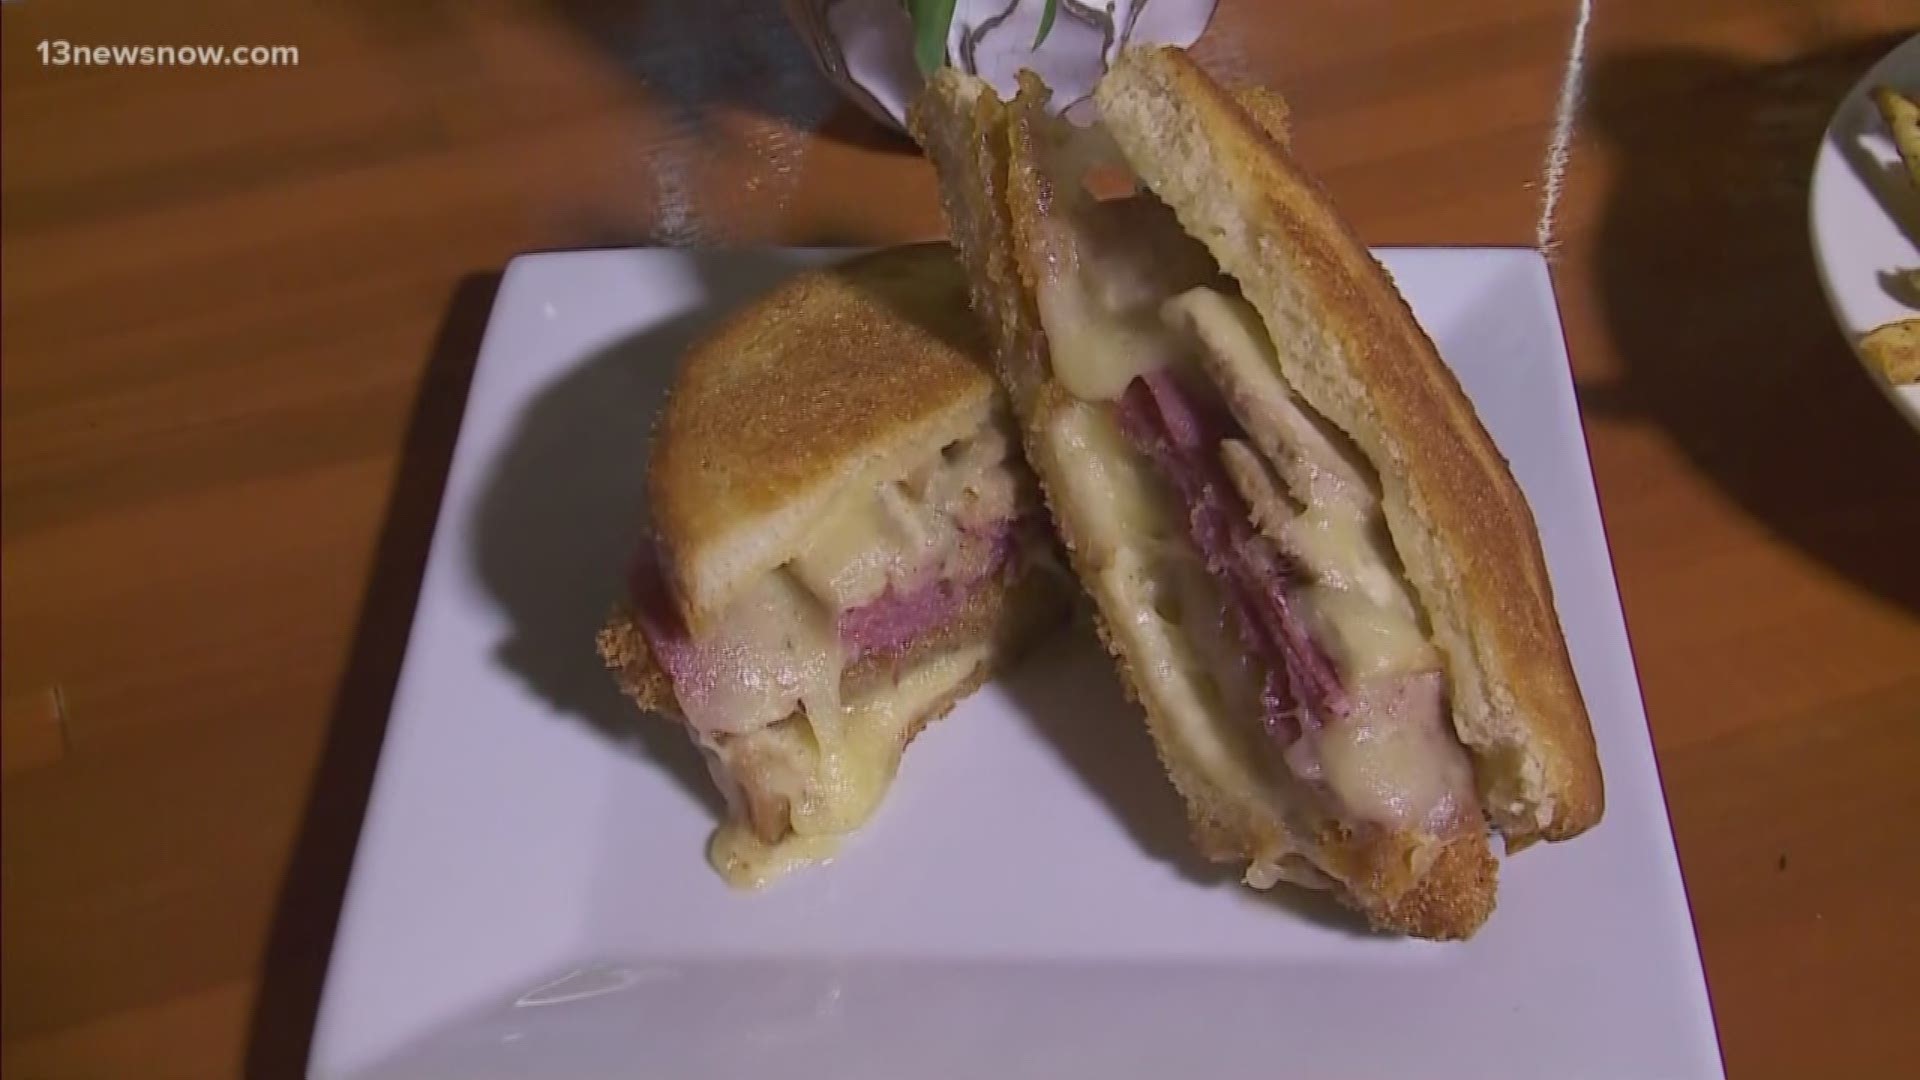 It's National Grilled Cheese Sandwhich Day and we're at The Grilled Cheese Bistro in Downtown Norfolk!